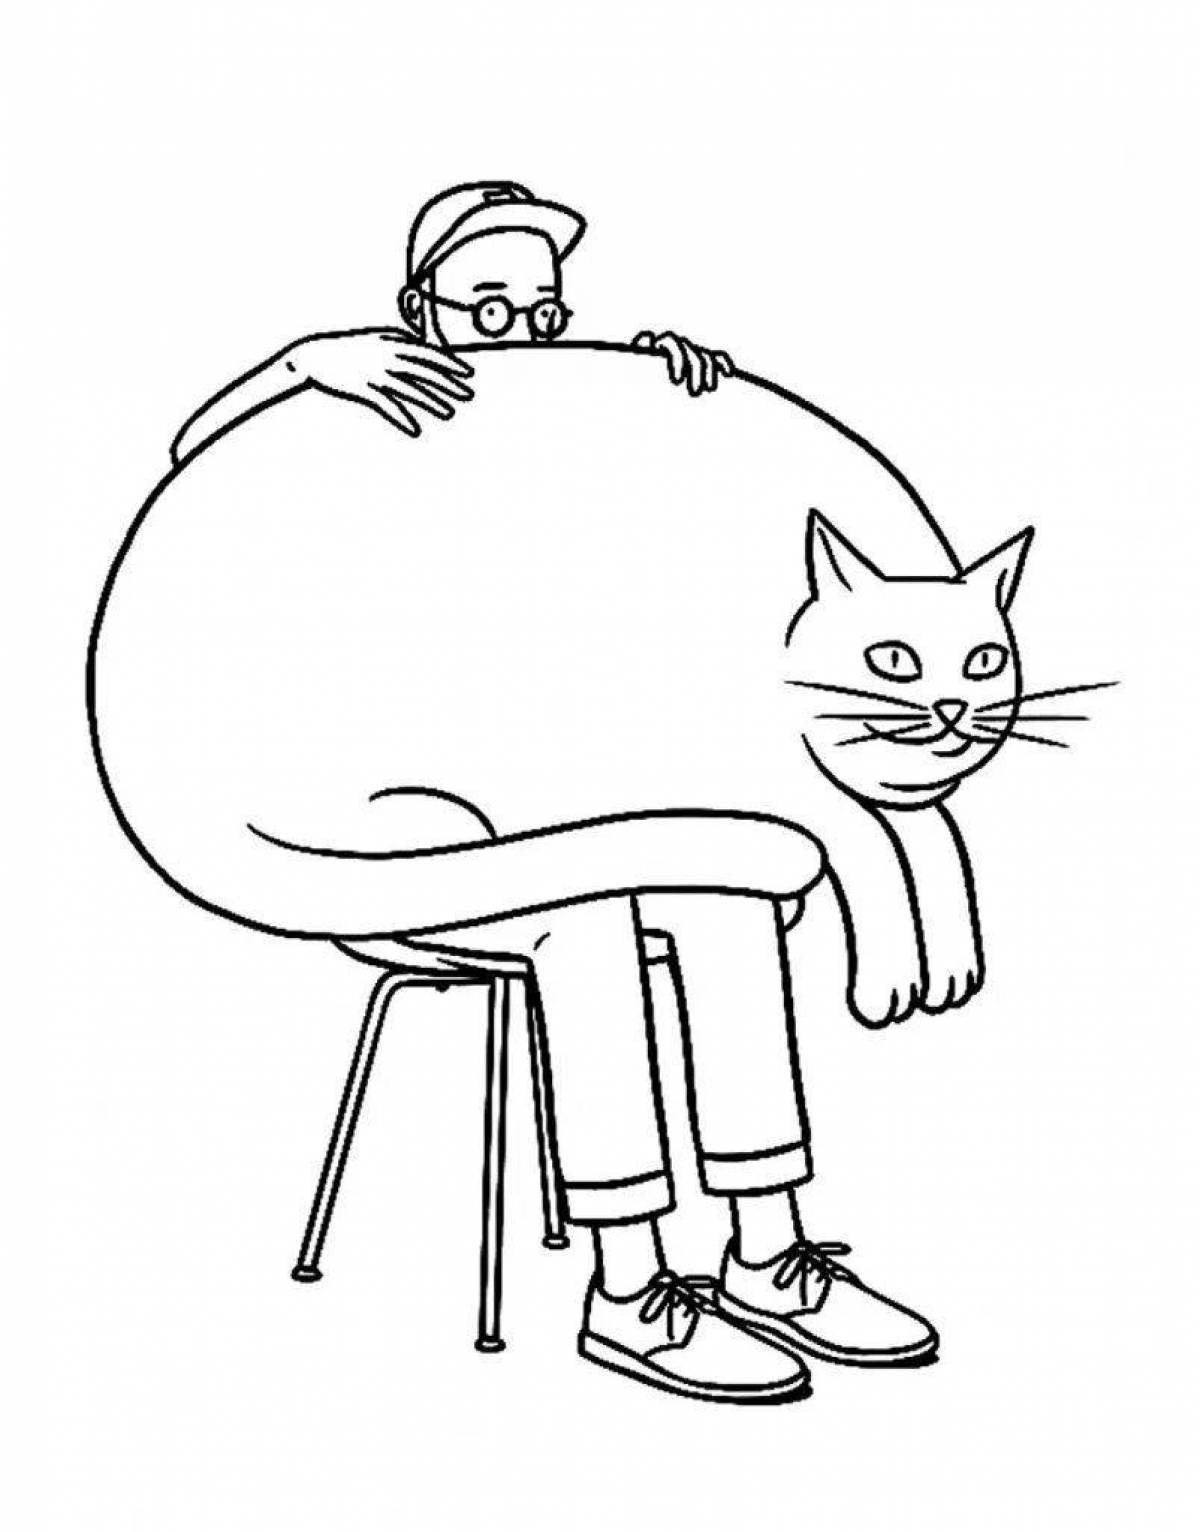 Coloring round fat cat